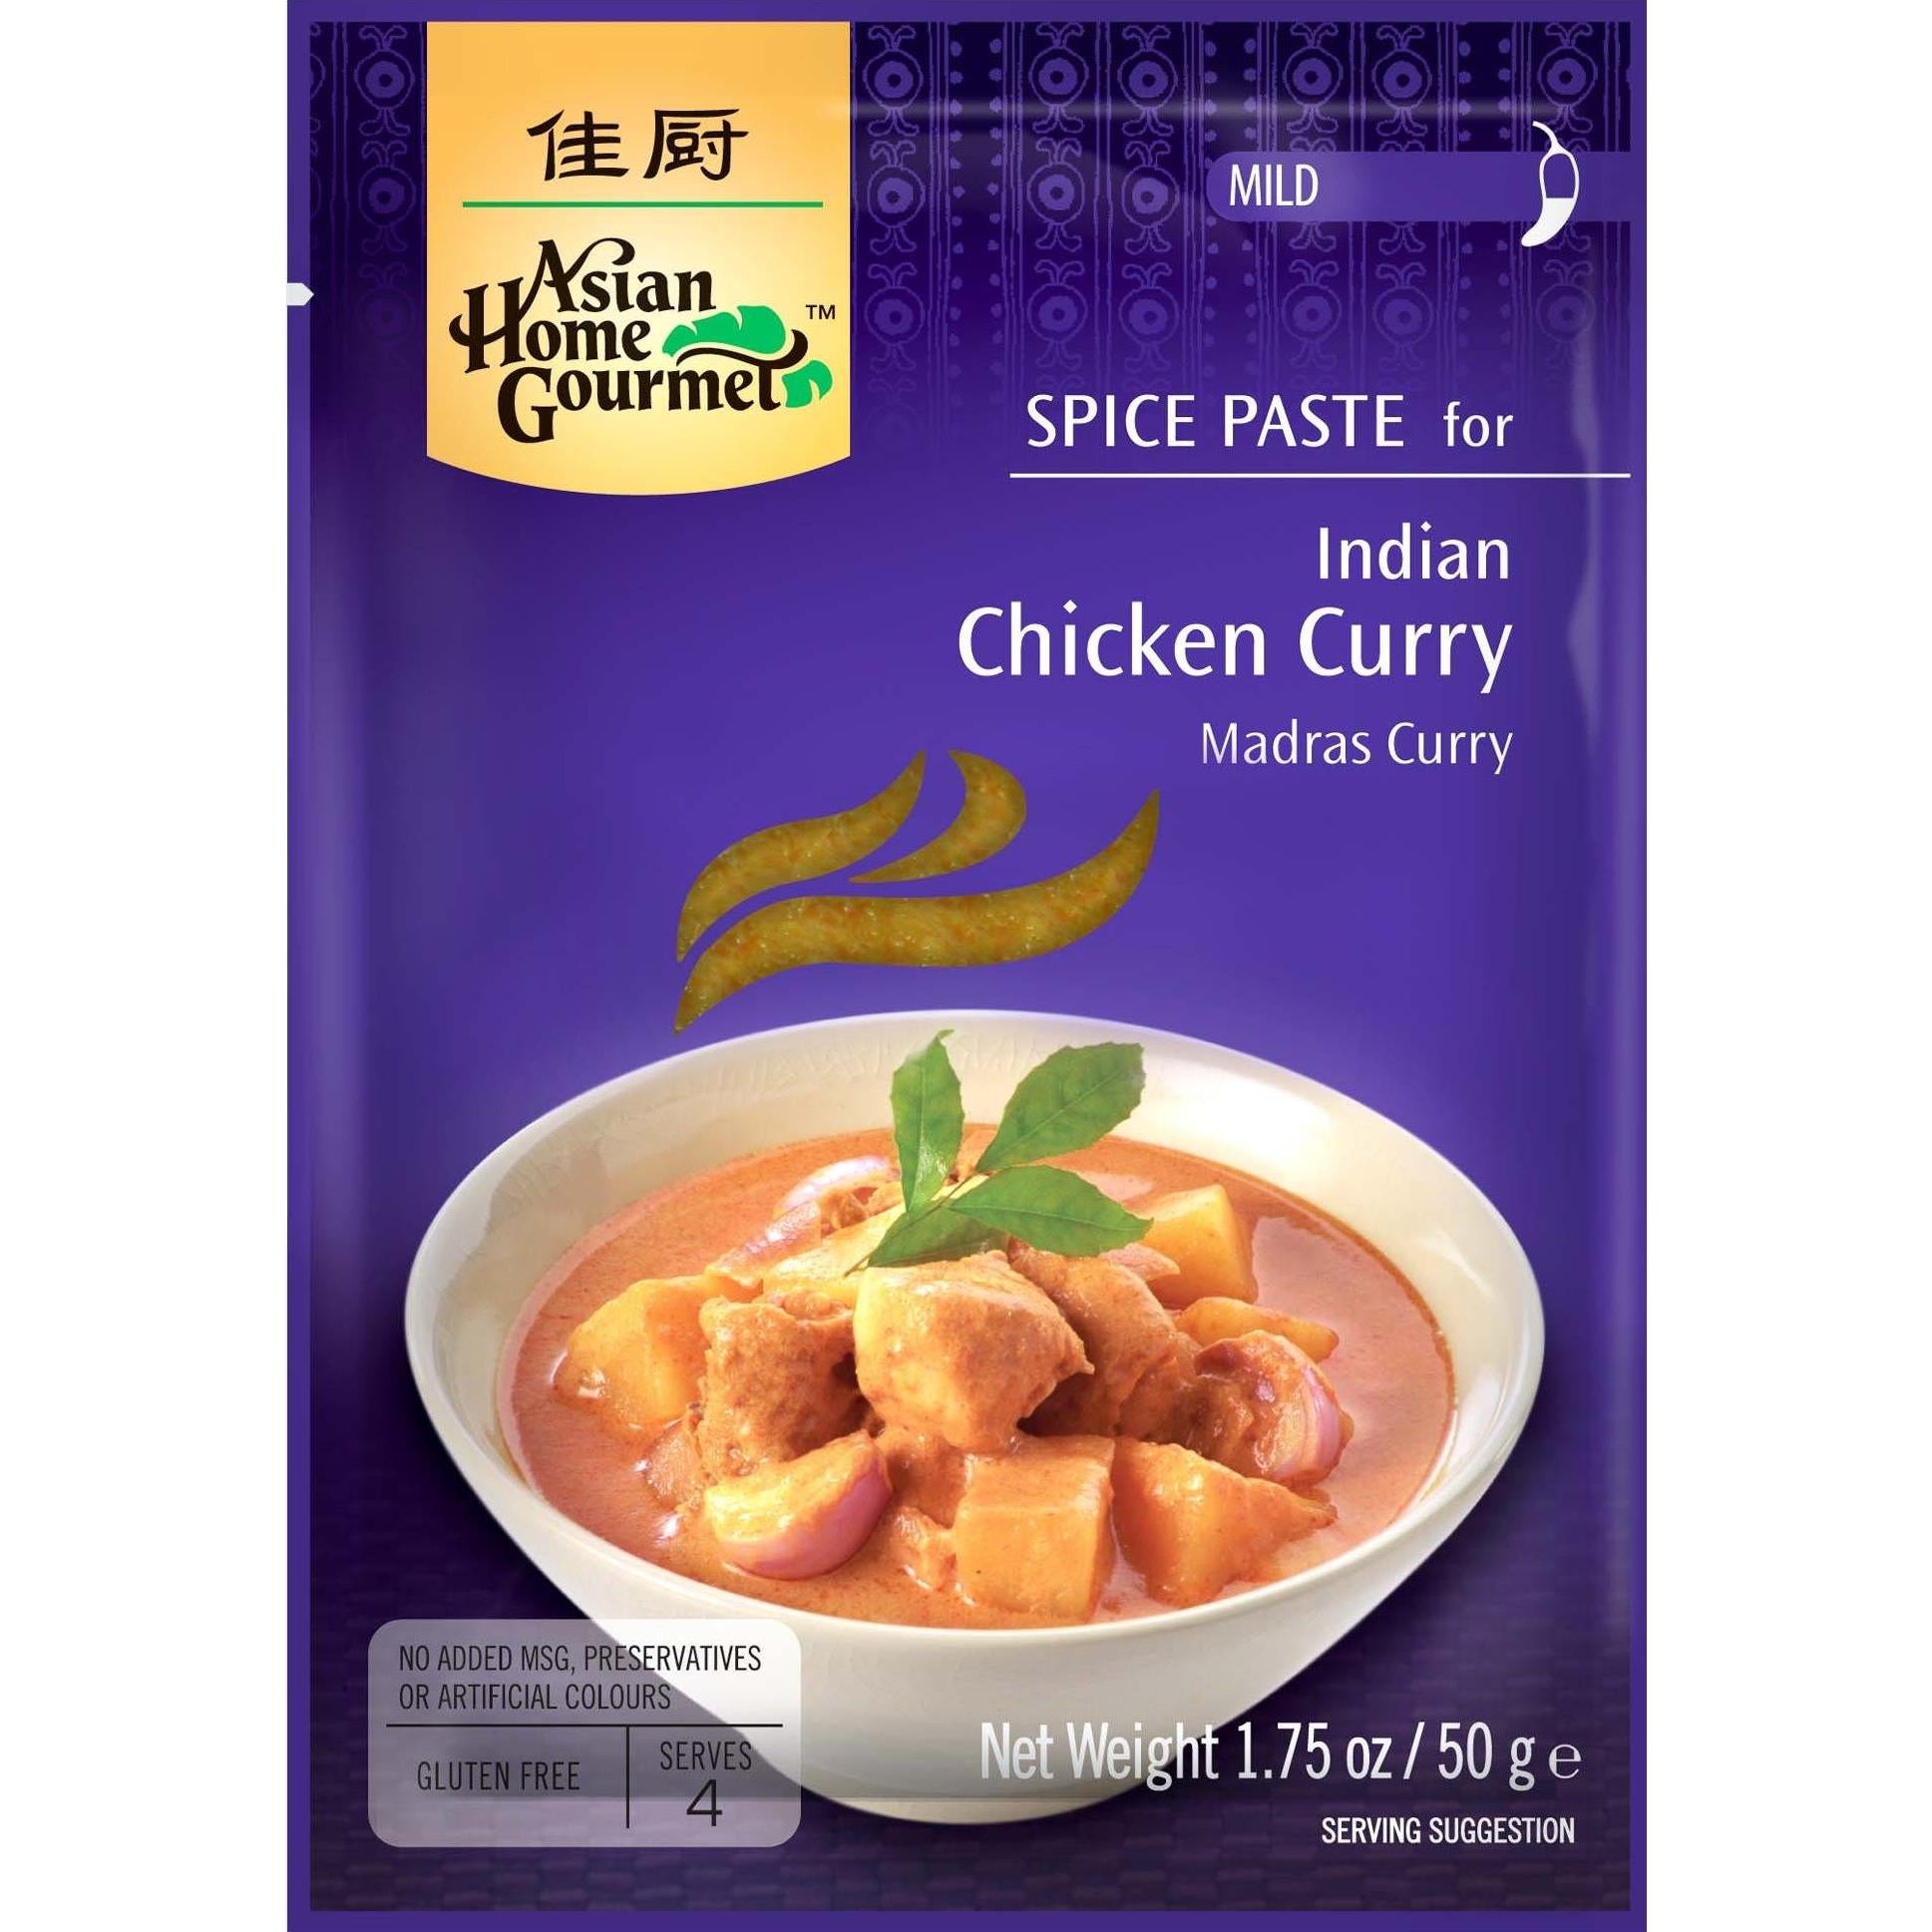 Asian Home Gourmet Indian Chicken Curry Spice Paste, 1.75oz. (Pack of 3)